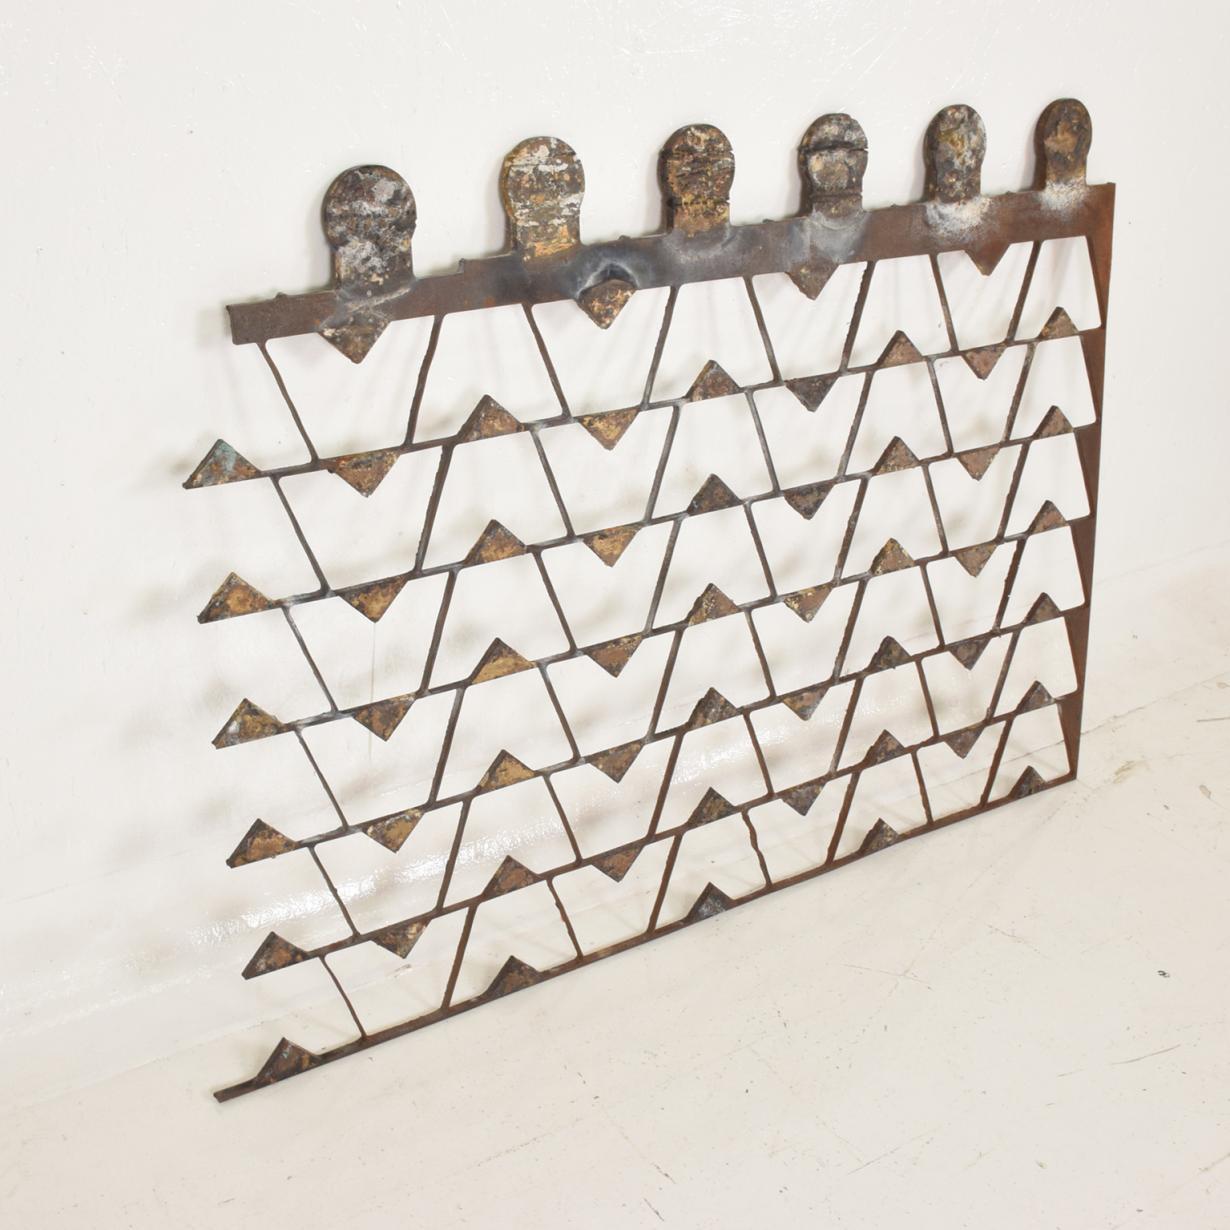 Late 20th Century Mexican Modernist Metal Art Room Divider Screen